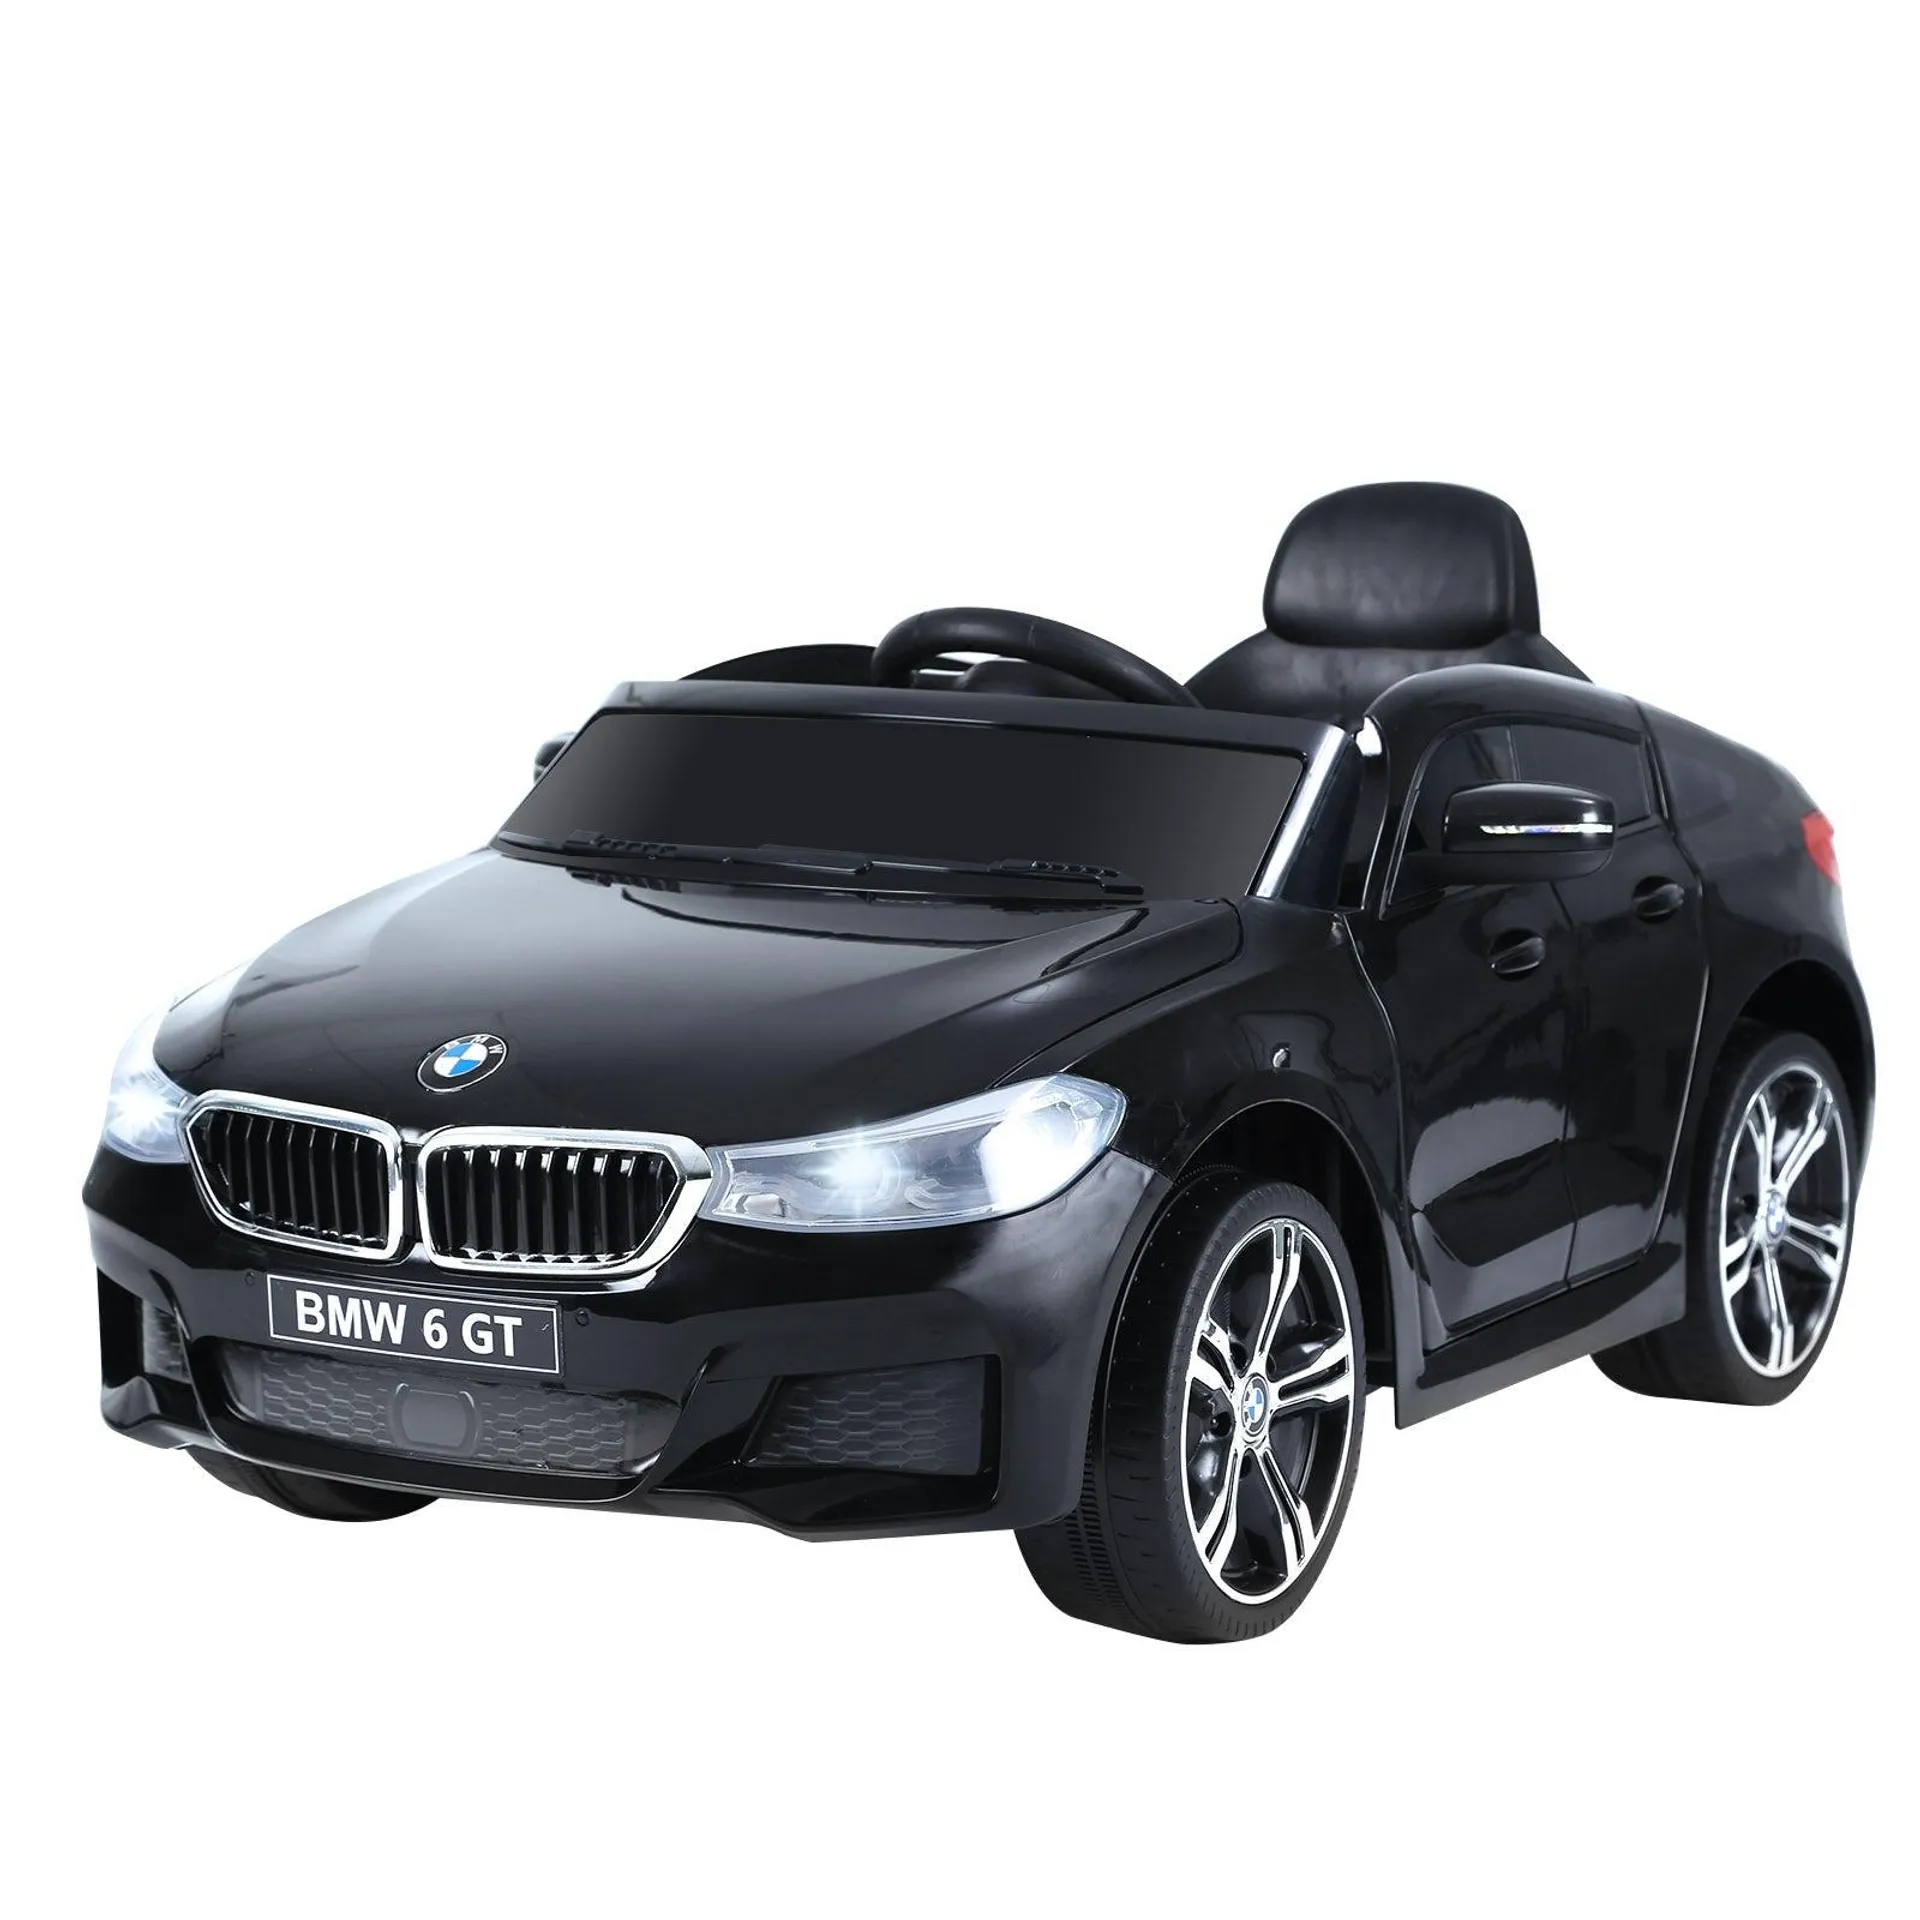 Maplin Plus Licensed BMW 6GT 6V Kids Electric Ride On Car with Remote Control - Black